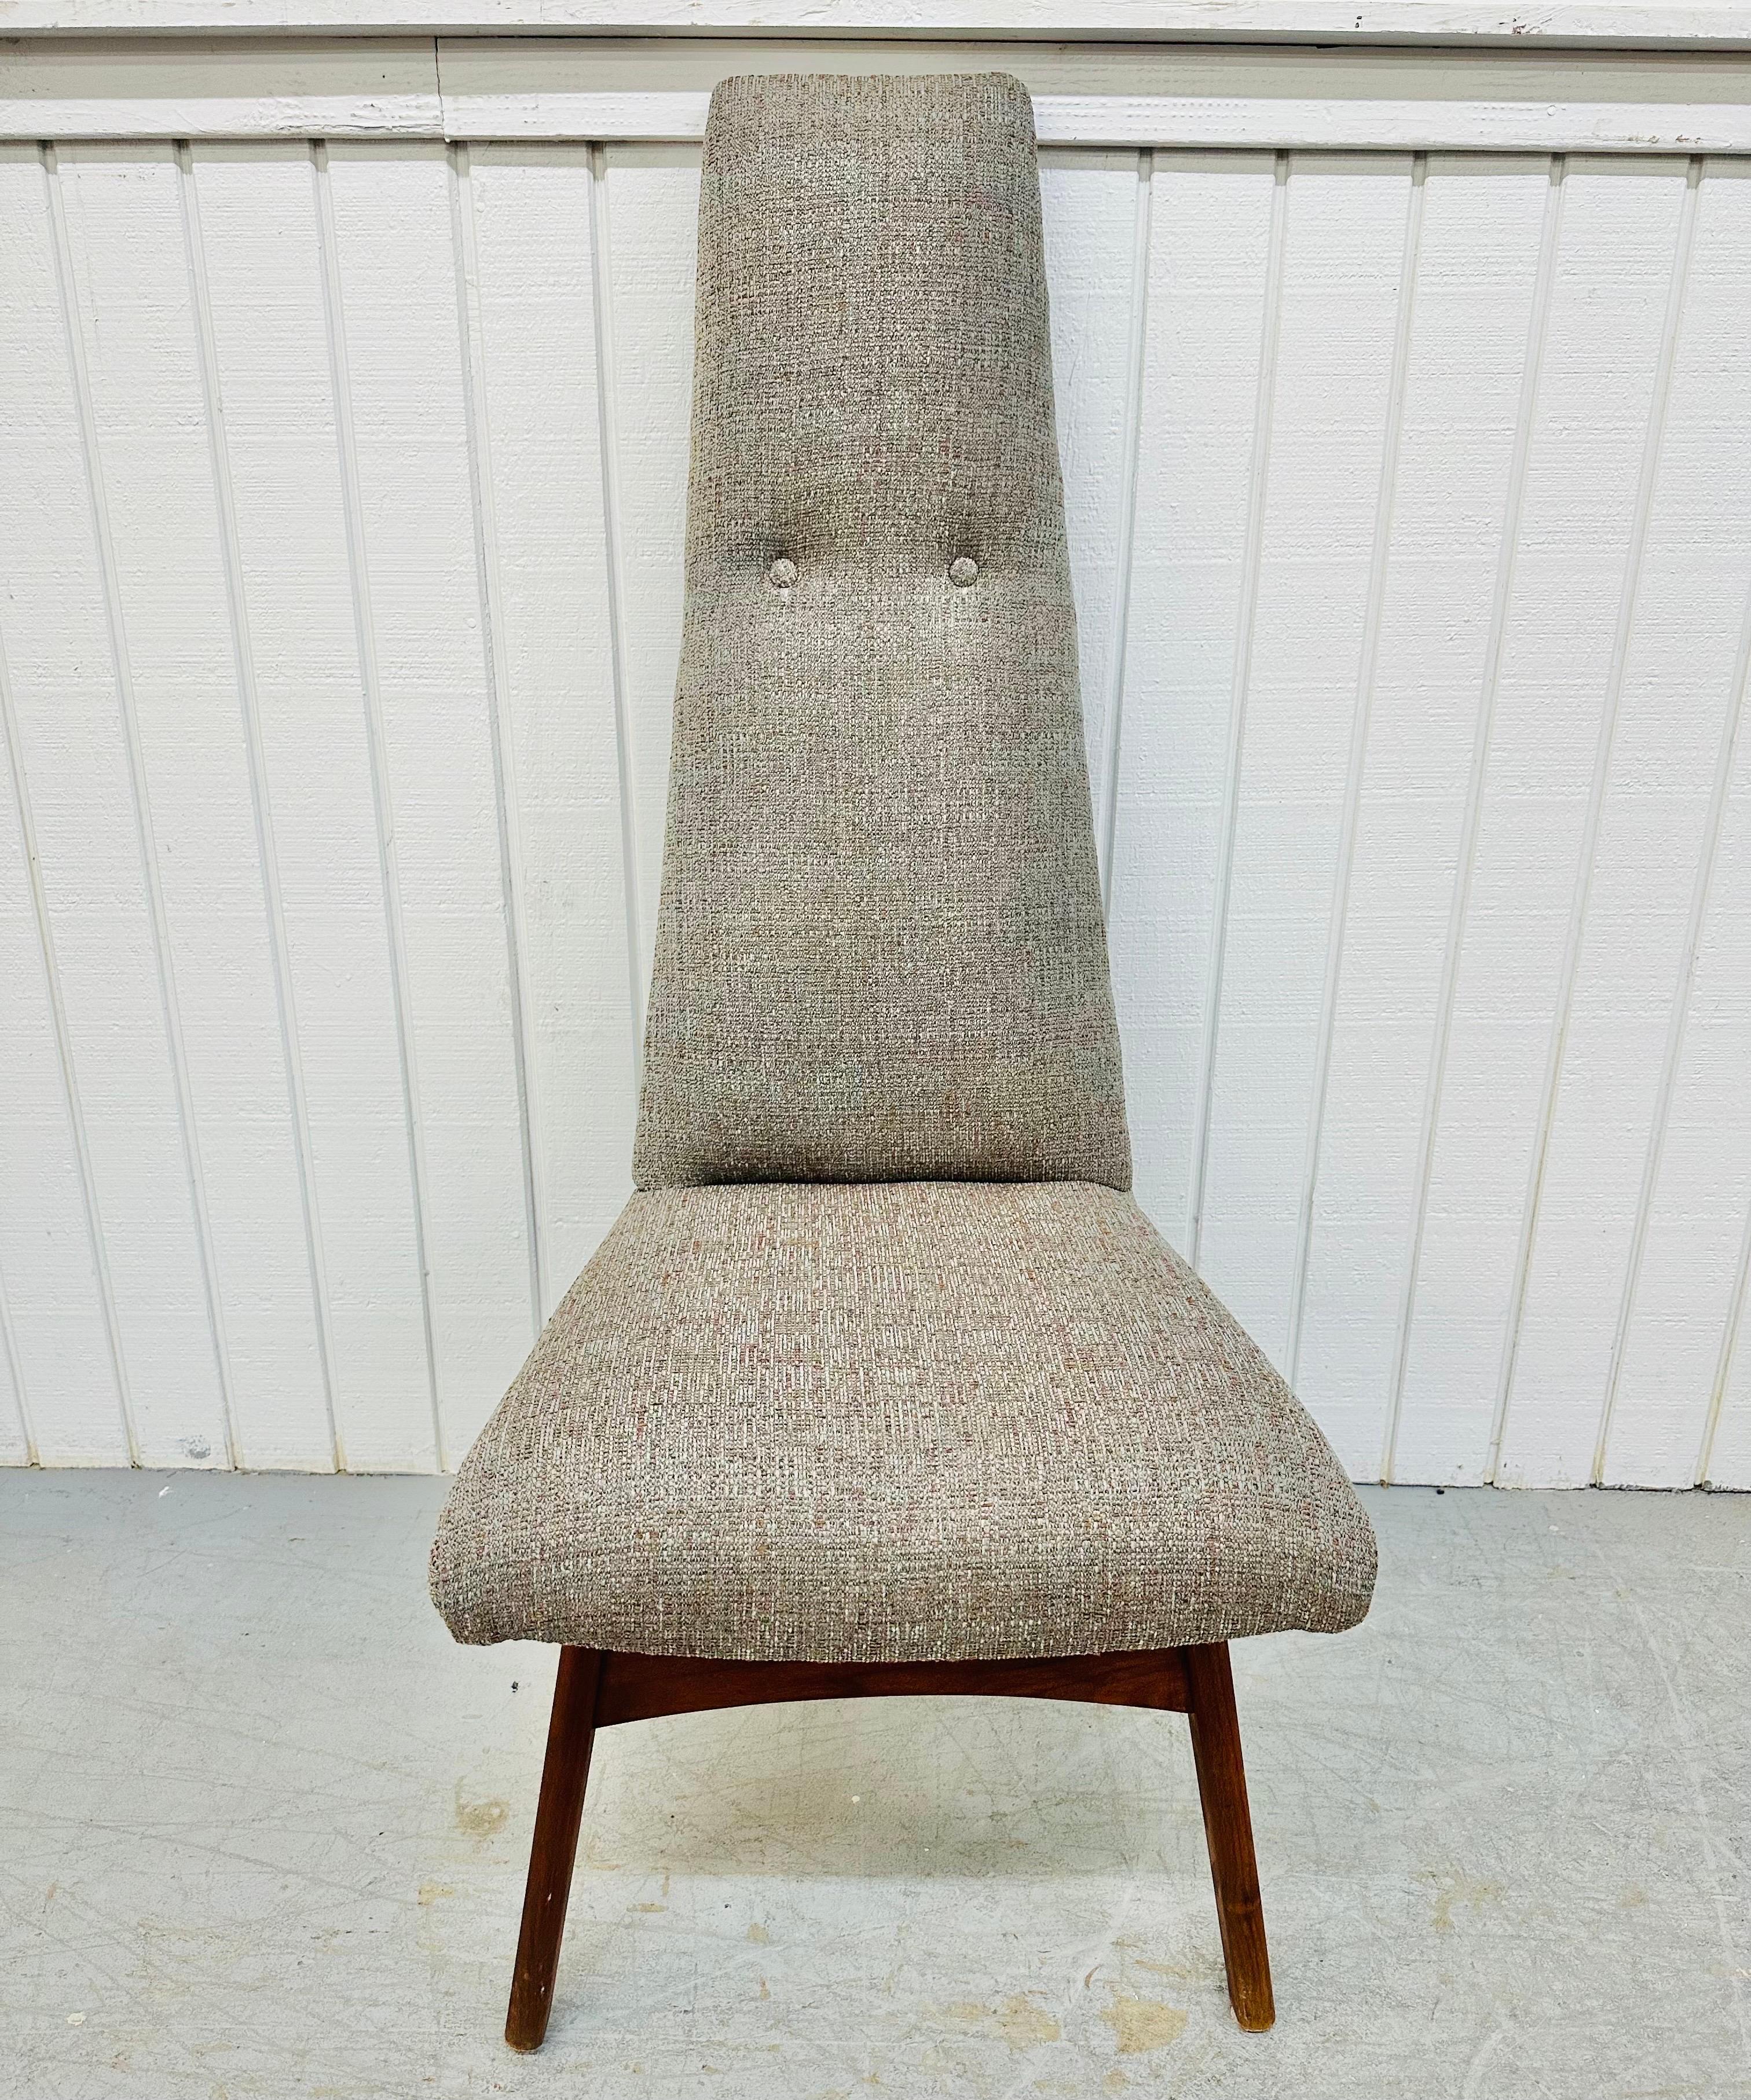 Upholstery Mid-Century Modern Adrian Pearsall High-Back Dining Chairs - Set of 6 For Sale